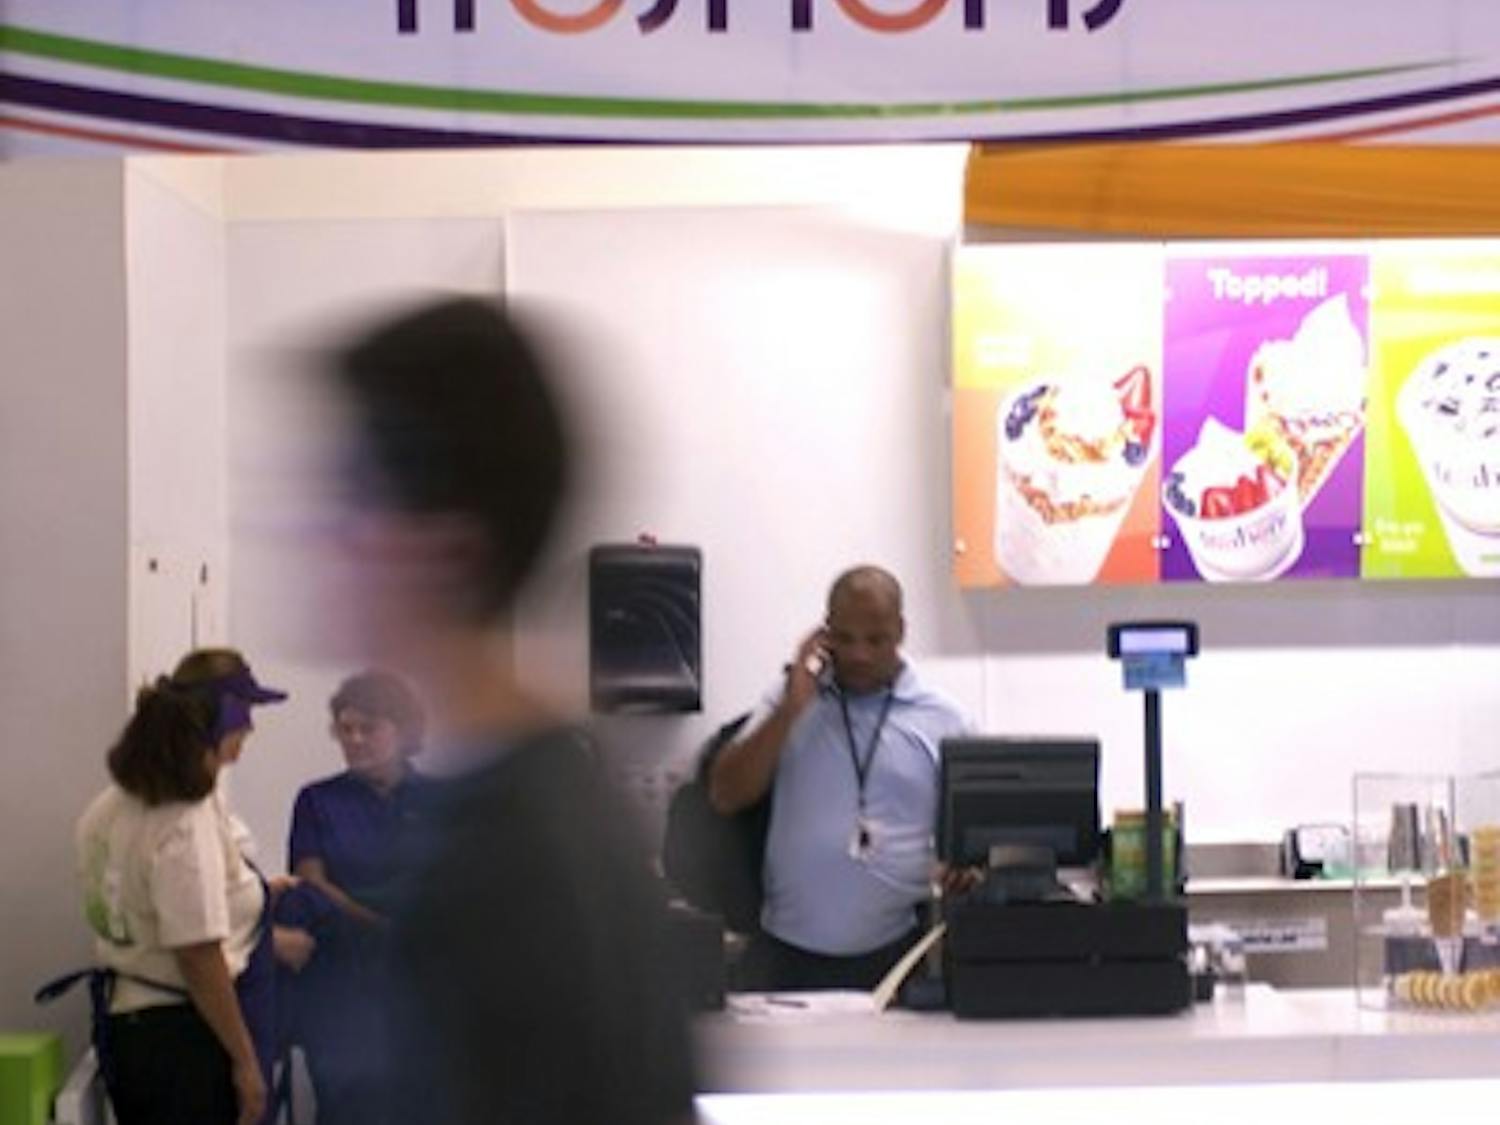 FOOD FOR THOUGHT: Freshens, a new frozen yogurt spot in the Memorial Union, offers students a way to snack healthy. (Photo By Scott Stuk)